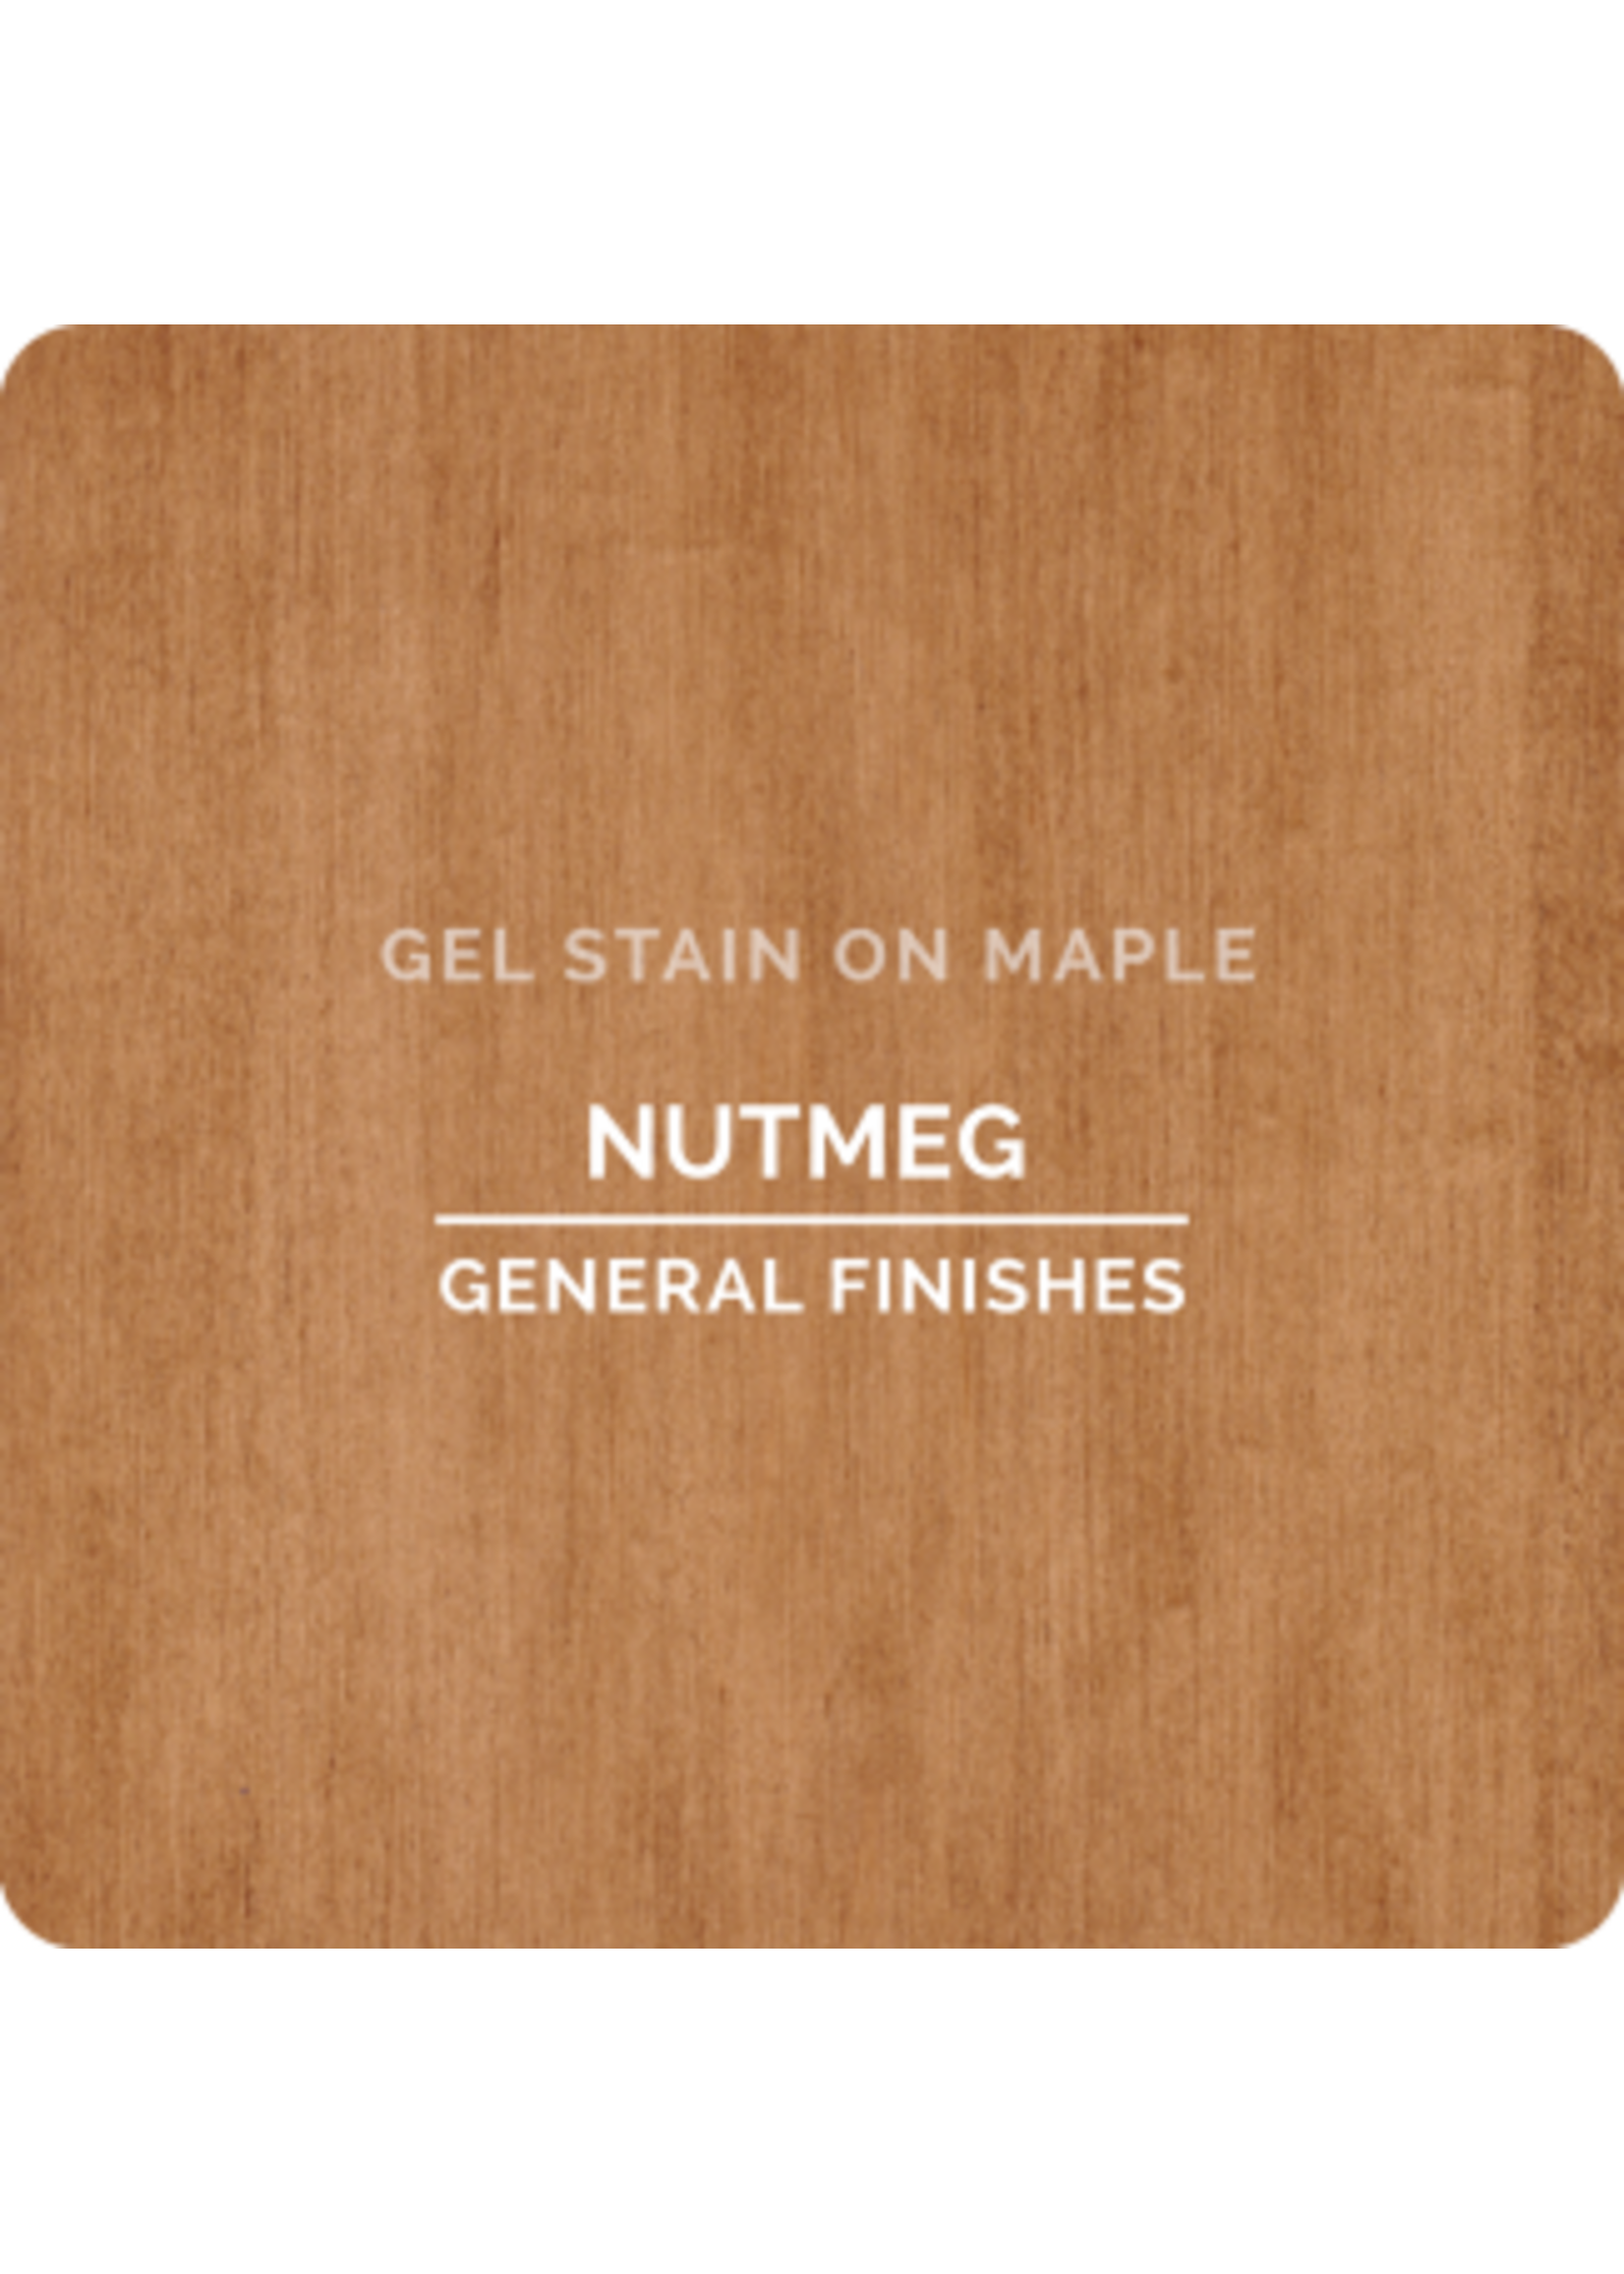 General Finishes Nutmeg  General Finishes Gel Stain